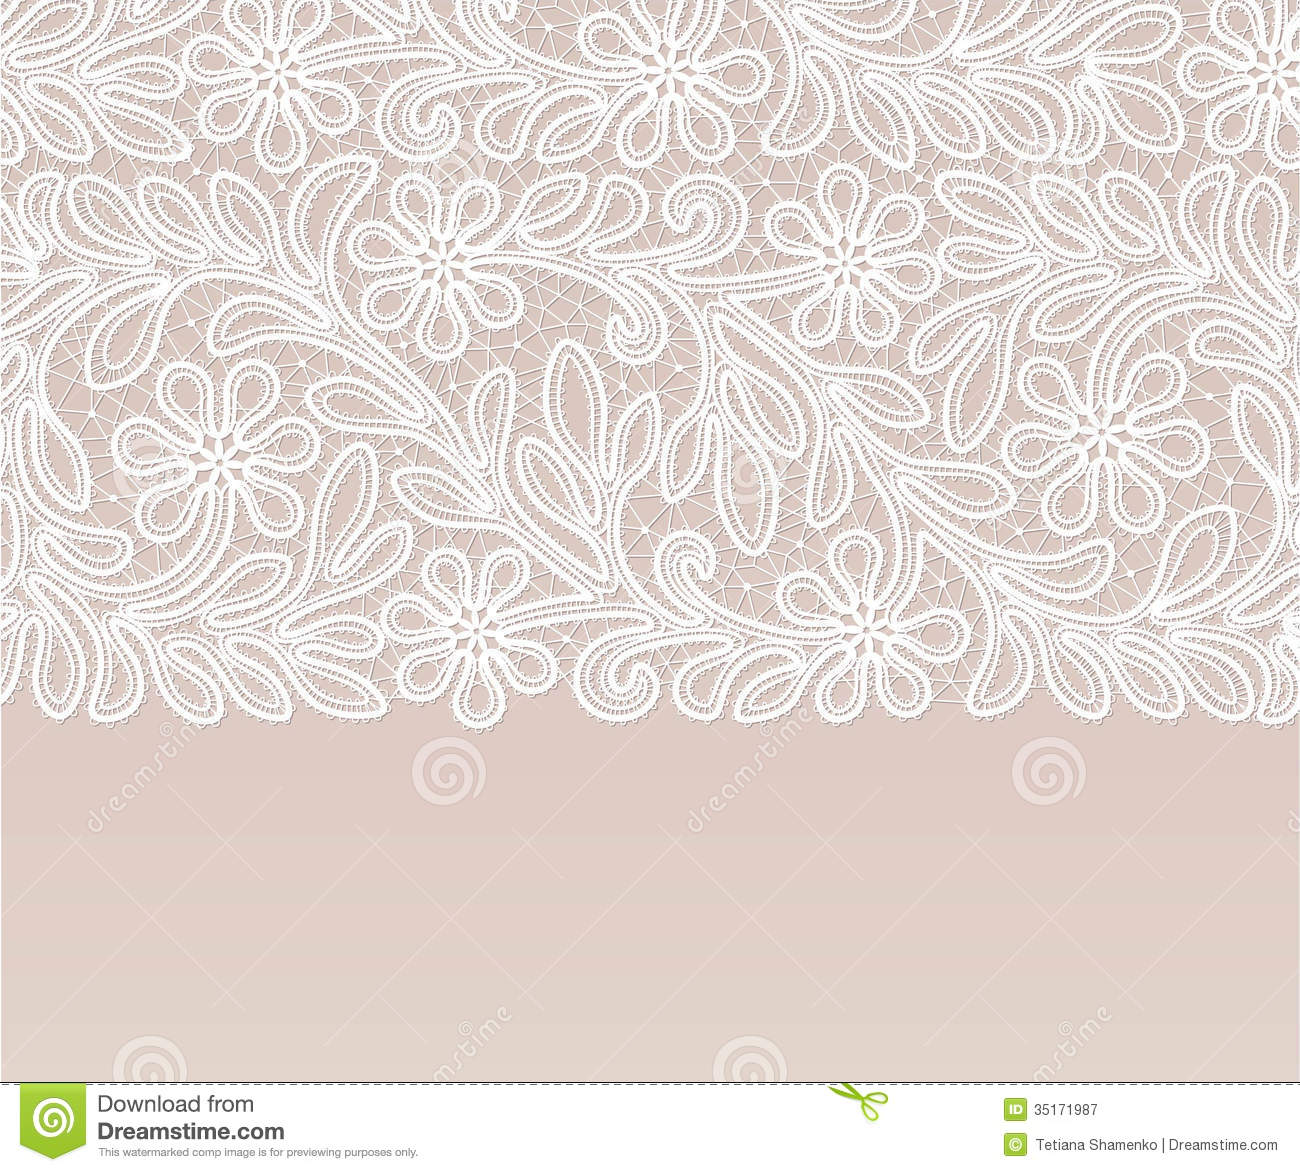 Vintage Lace Doily Royalty Free Stock Photography   Image  35171987